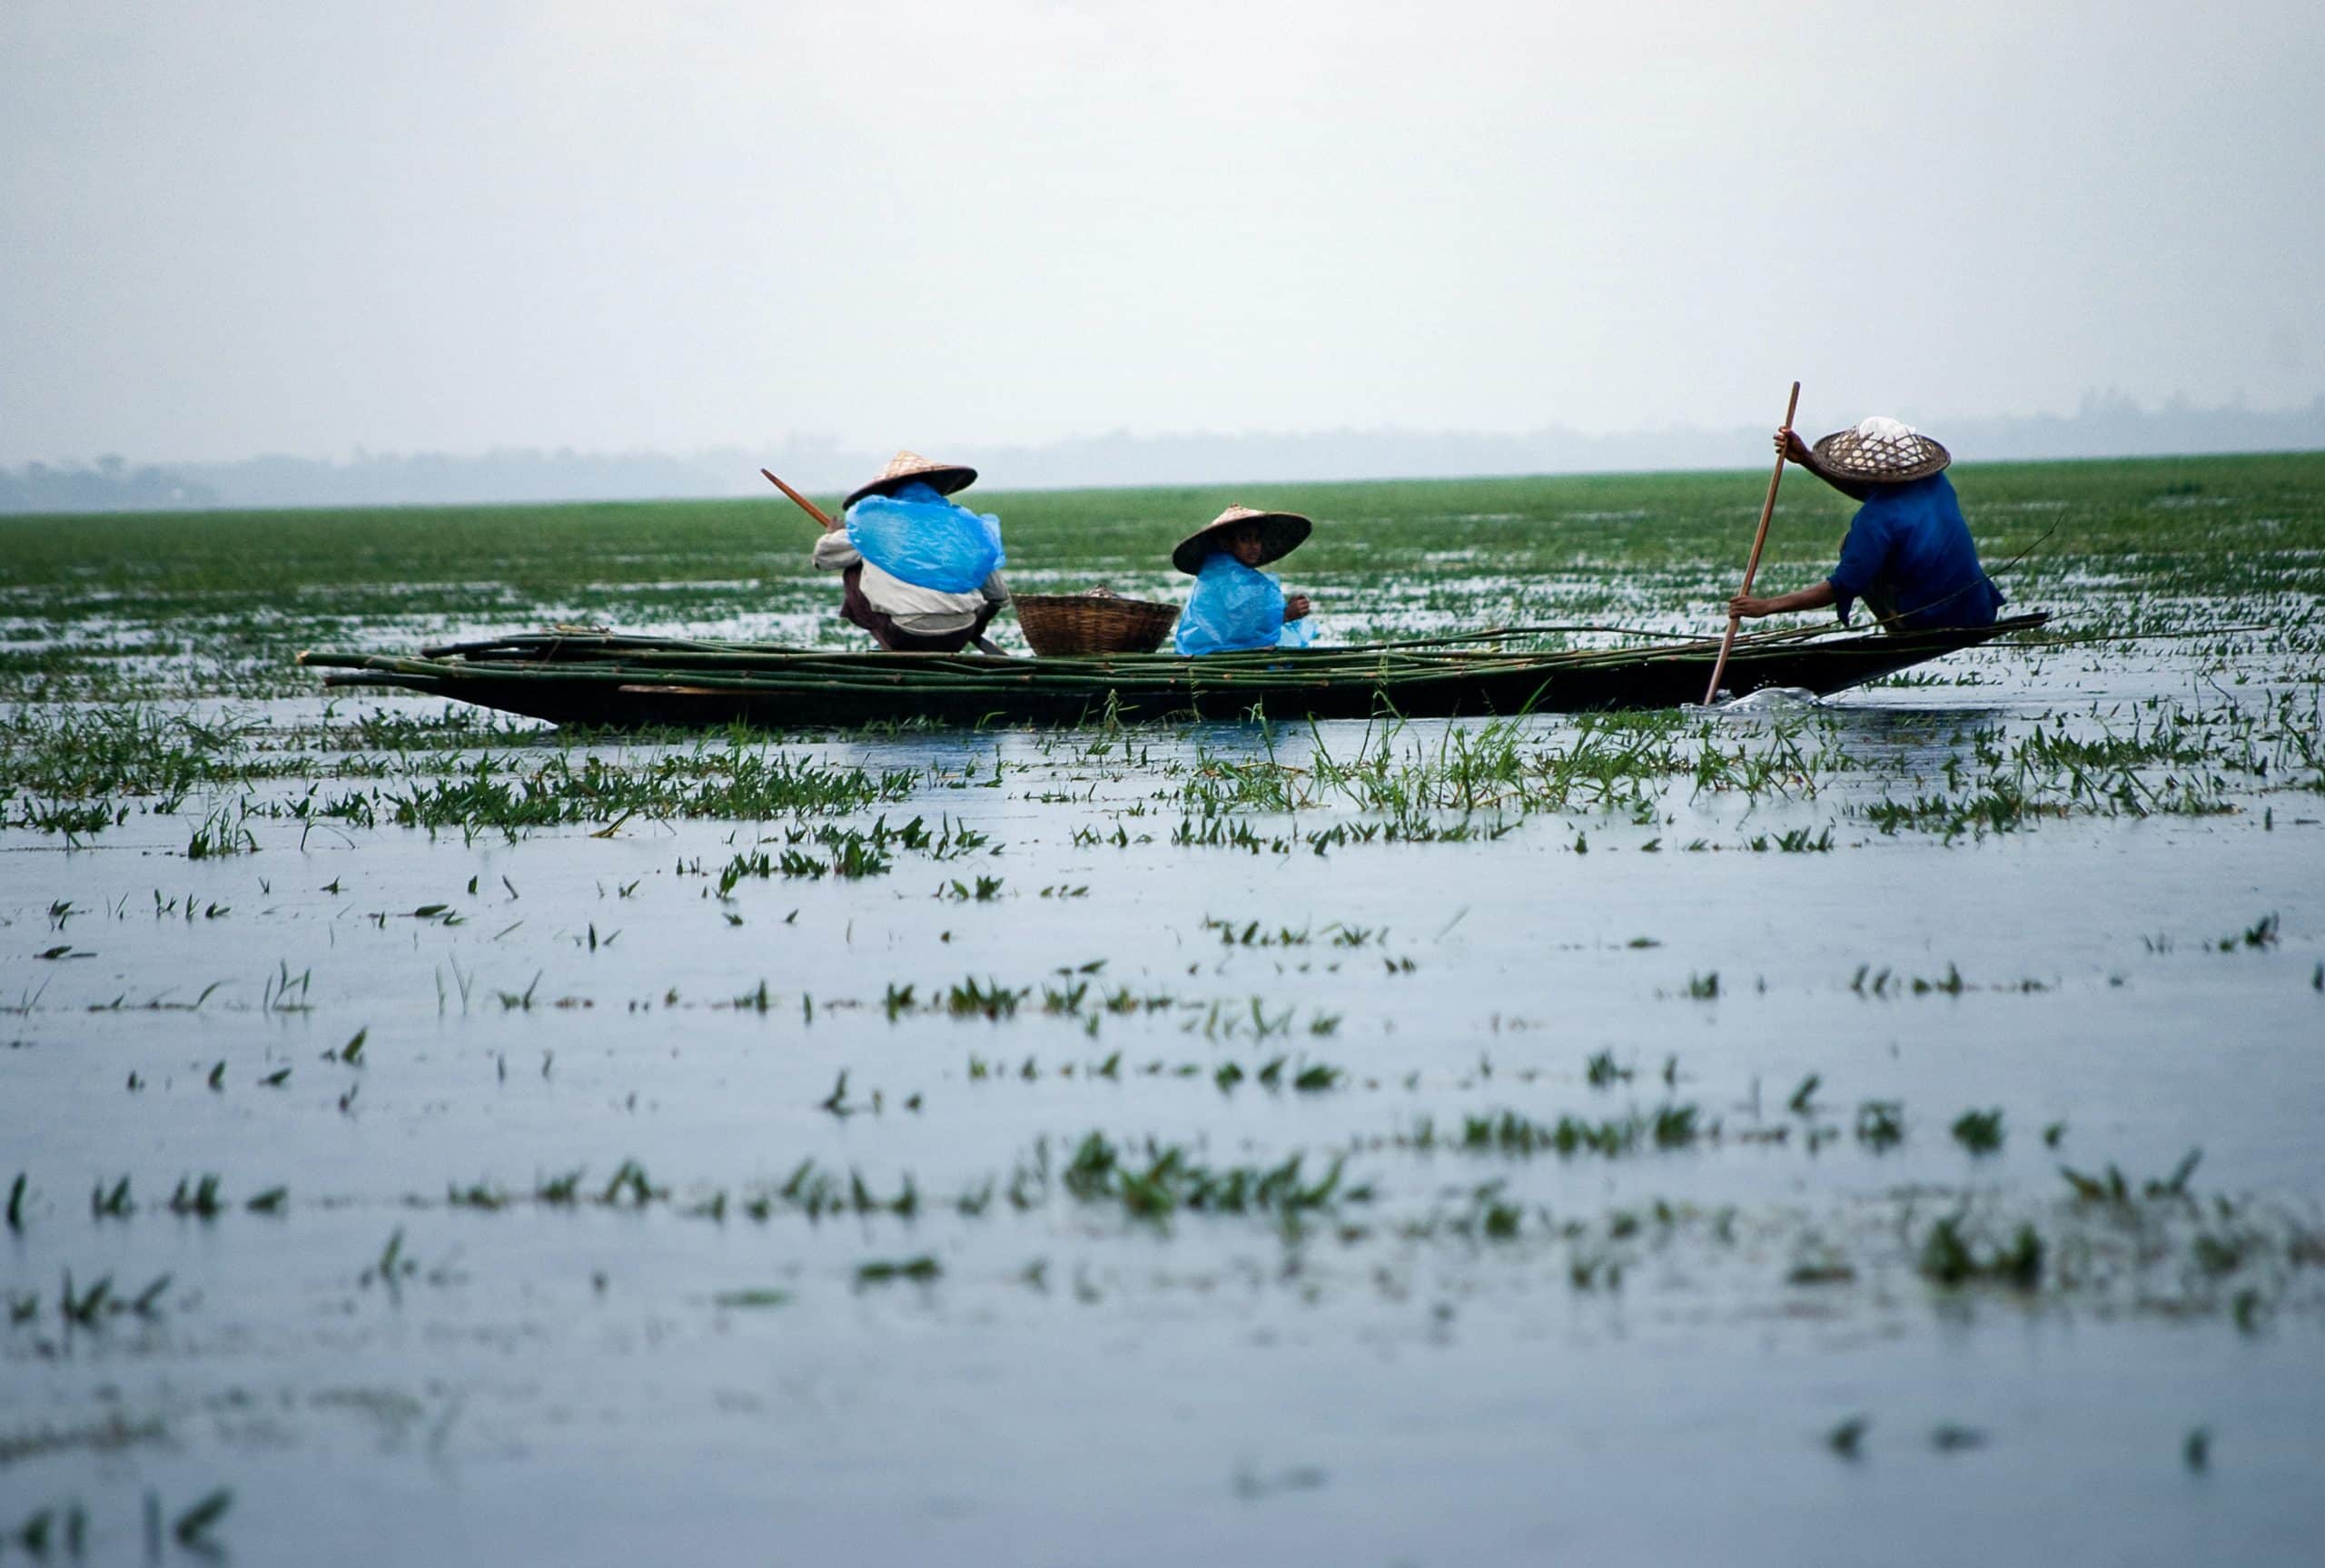 20 million people could be displaced by 2050 in Bangladesh due to rising sea levels. Photo by Ariful Haque?Pexels